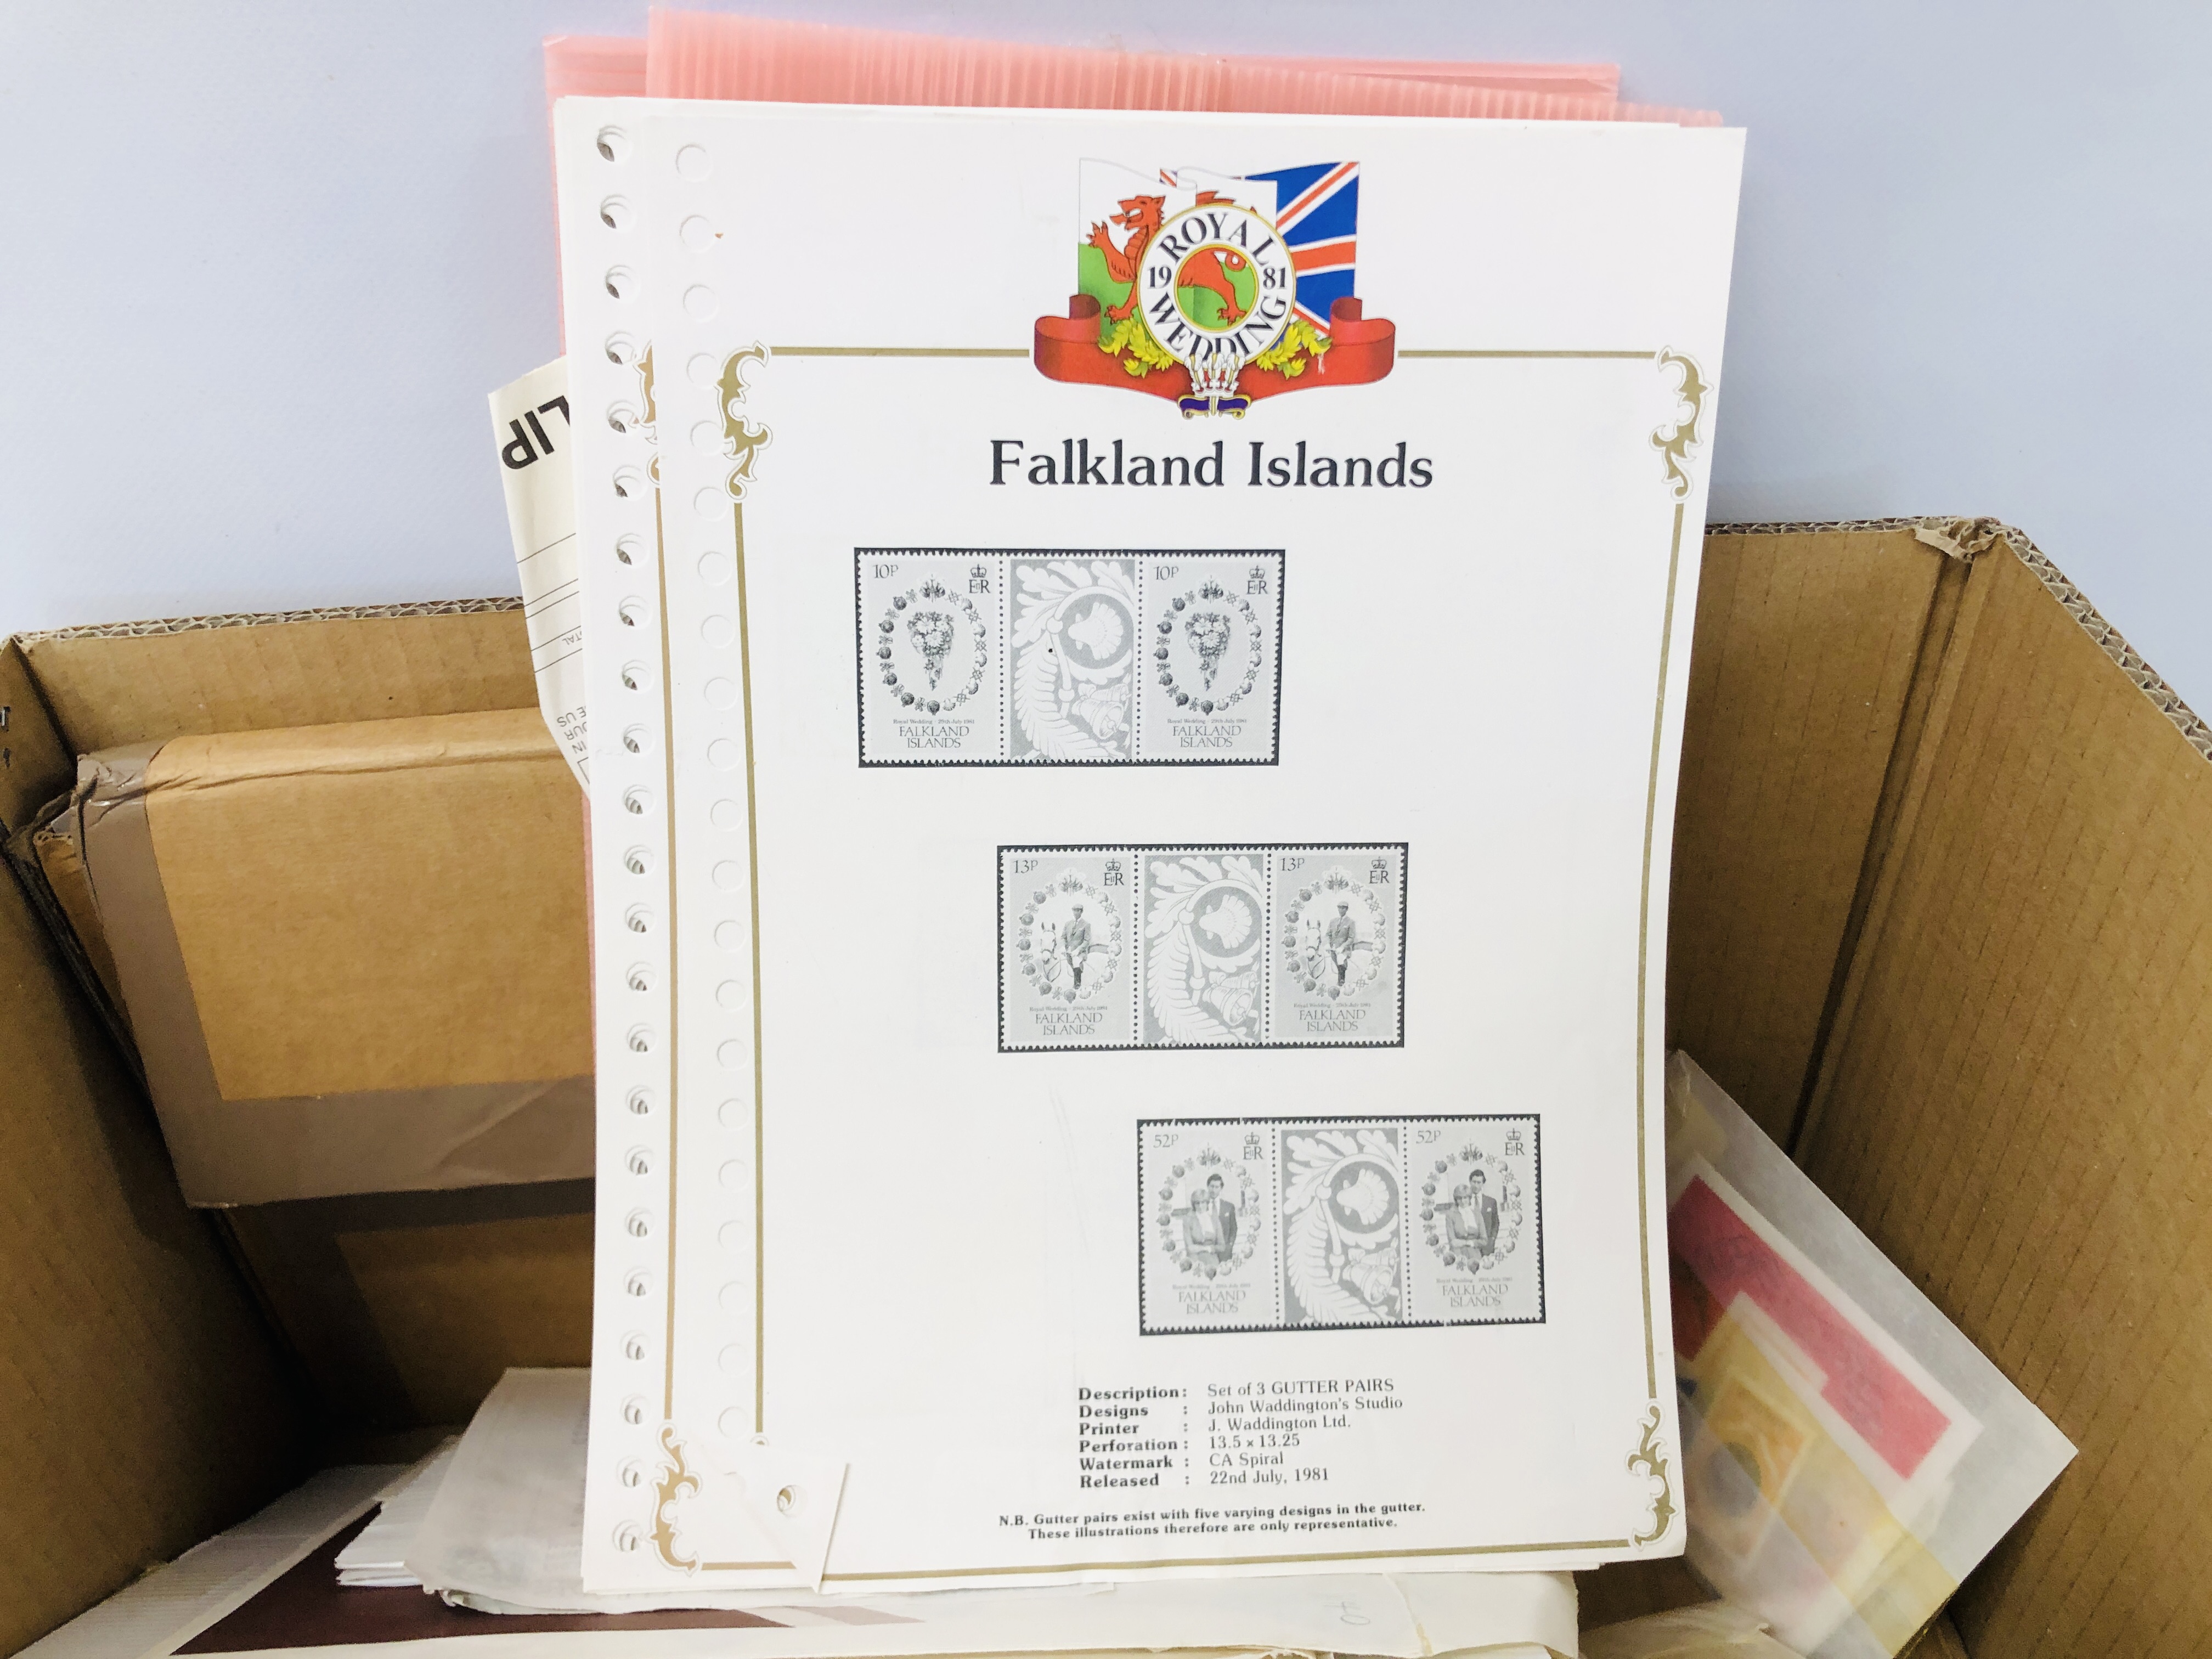 A BOX CONTAINING 1981 ROYAL WEDDING STAMPS AS RECEIVED FROM THE NEW ISSUE SERVICE ETC. - Image 8 of 8